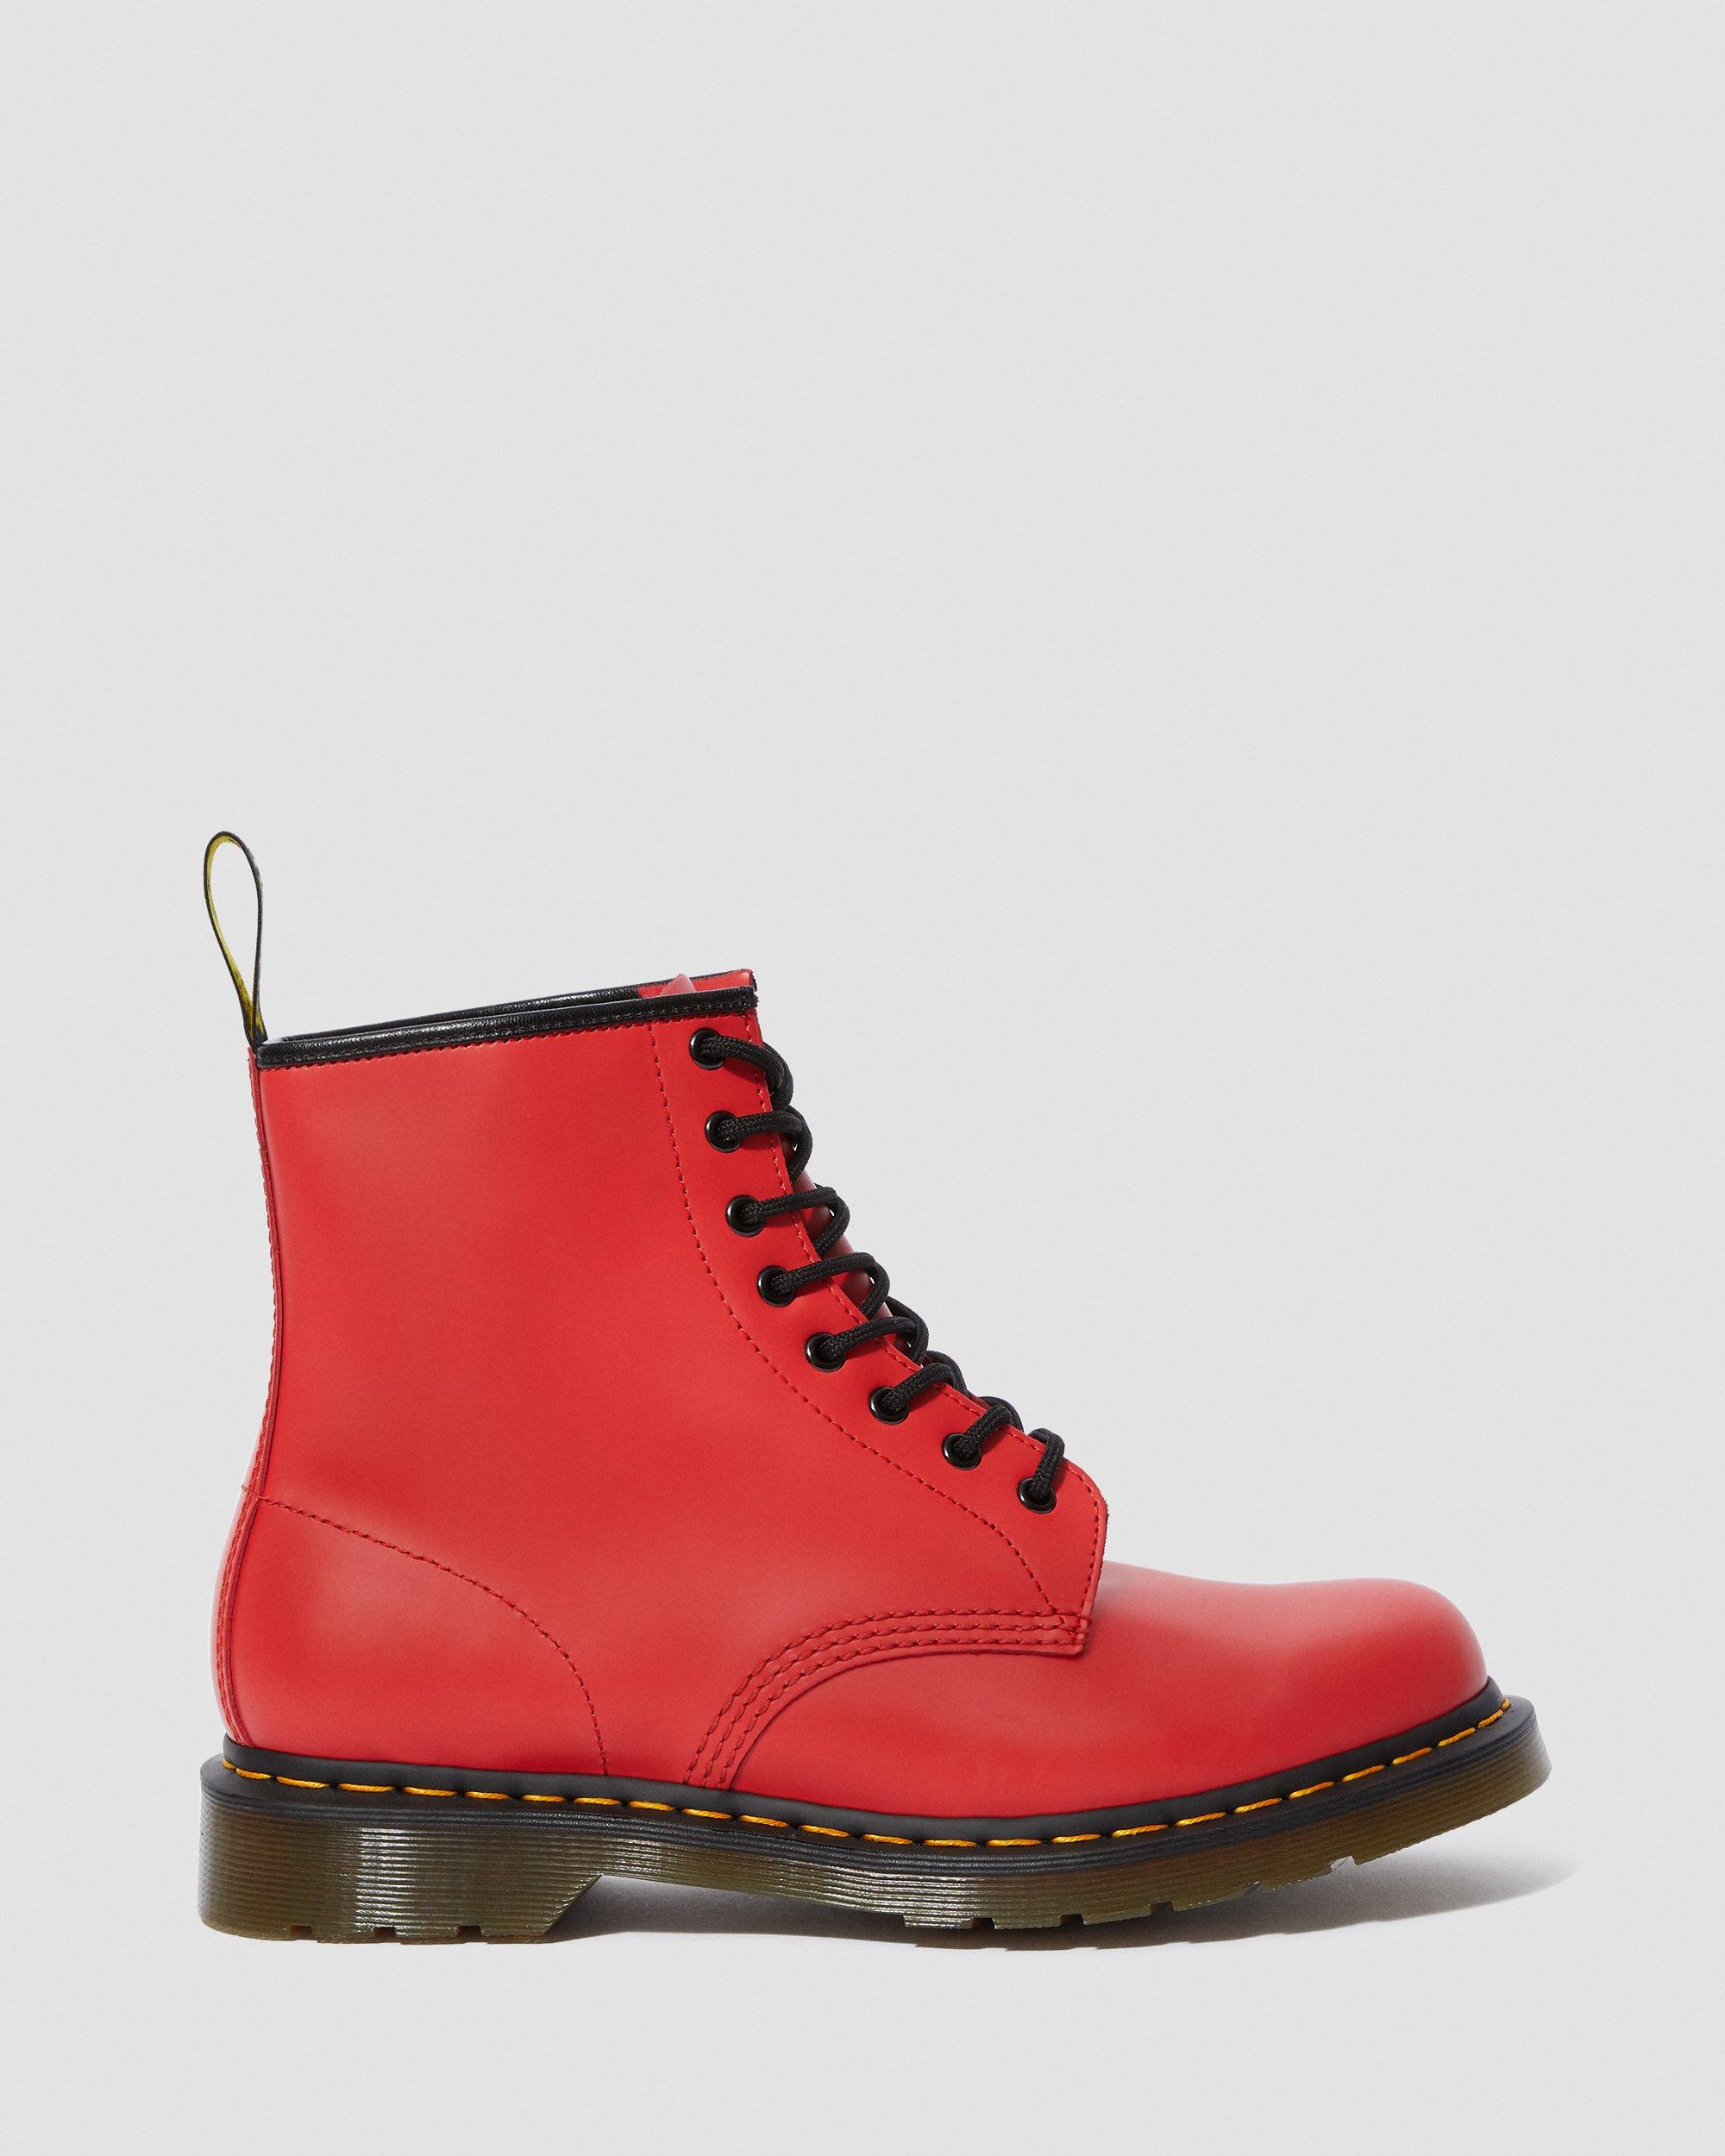 1460 SMOOTH LEATHER ANKLE BOOTS | Dr. Martens UK